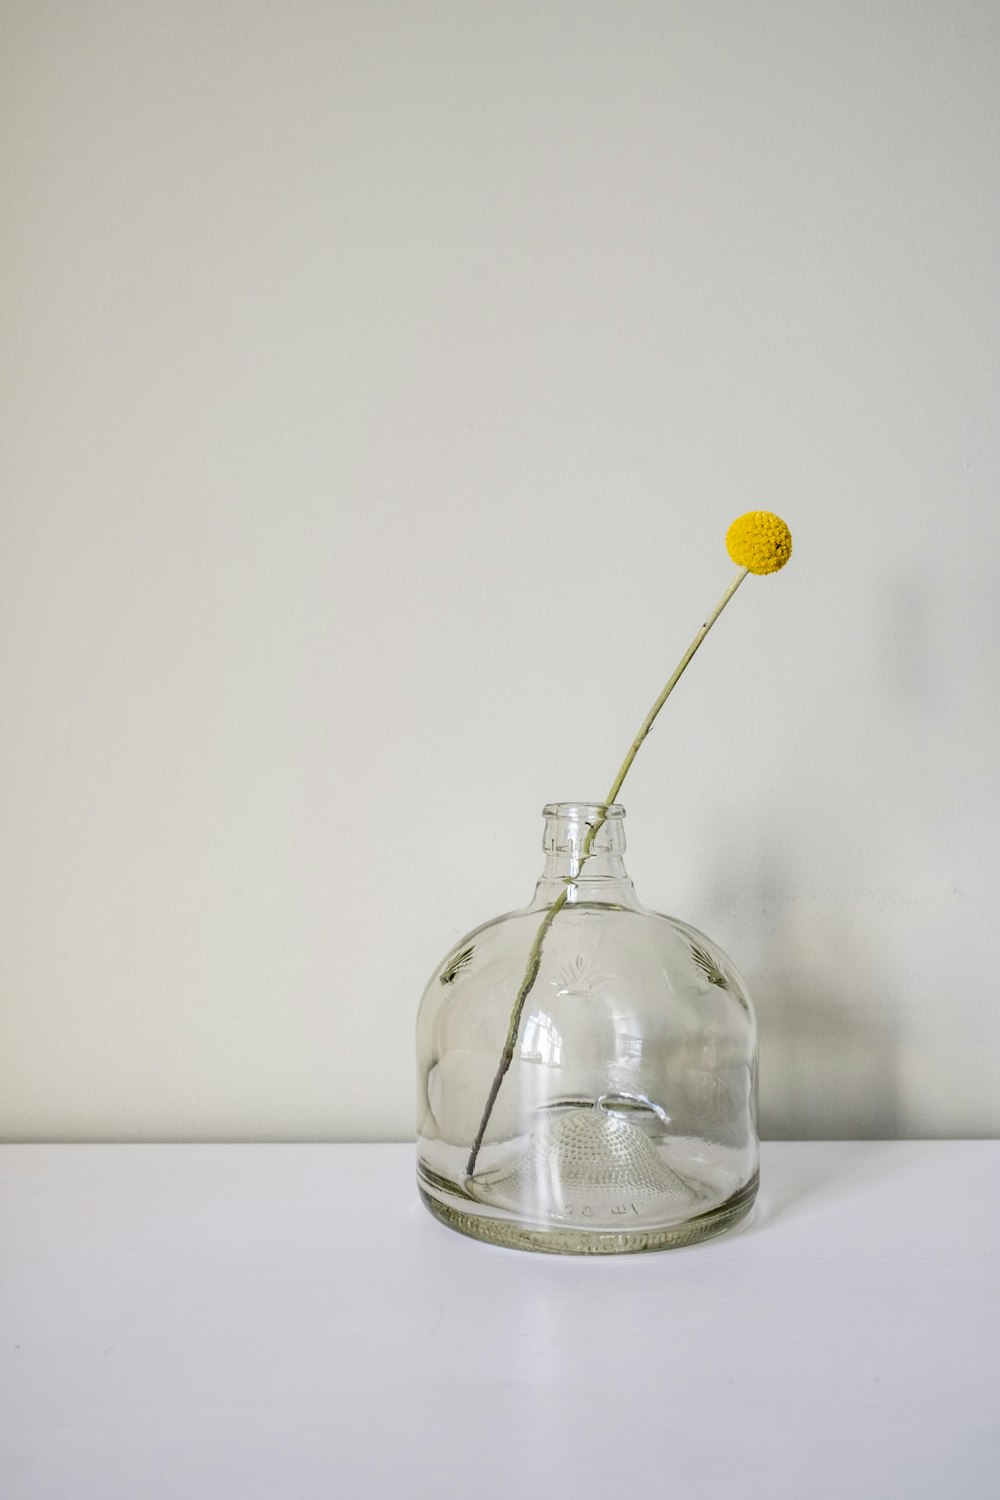 a single yellow flower in a glass vase